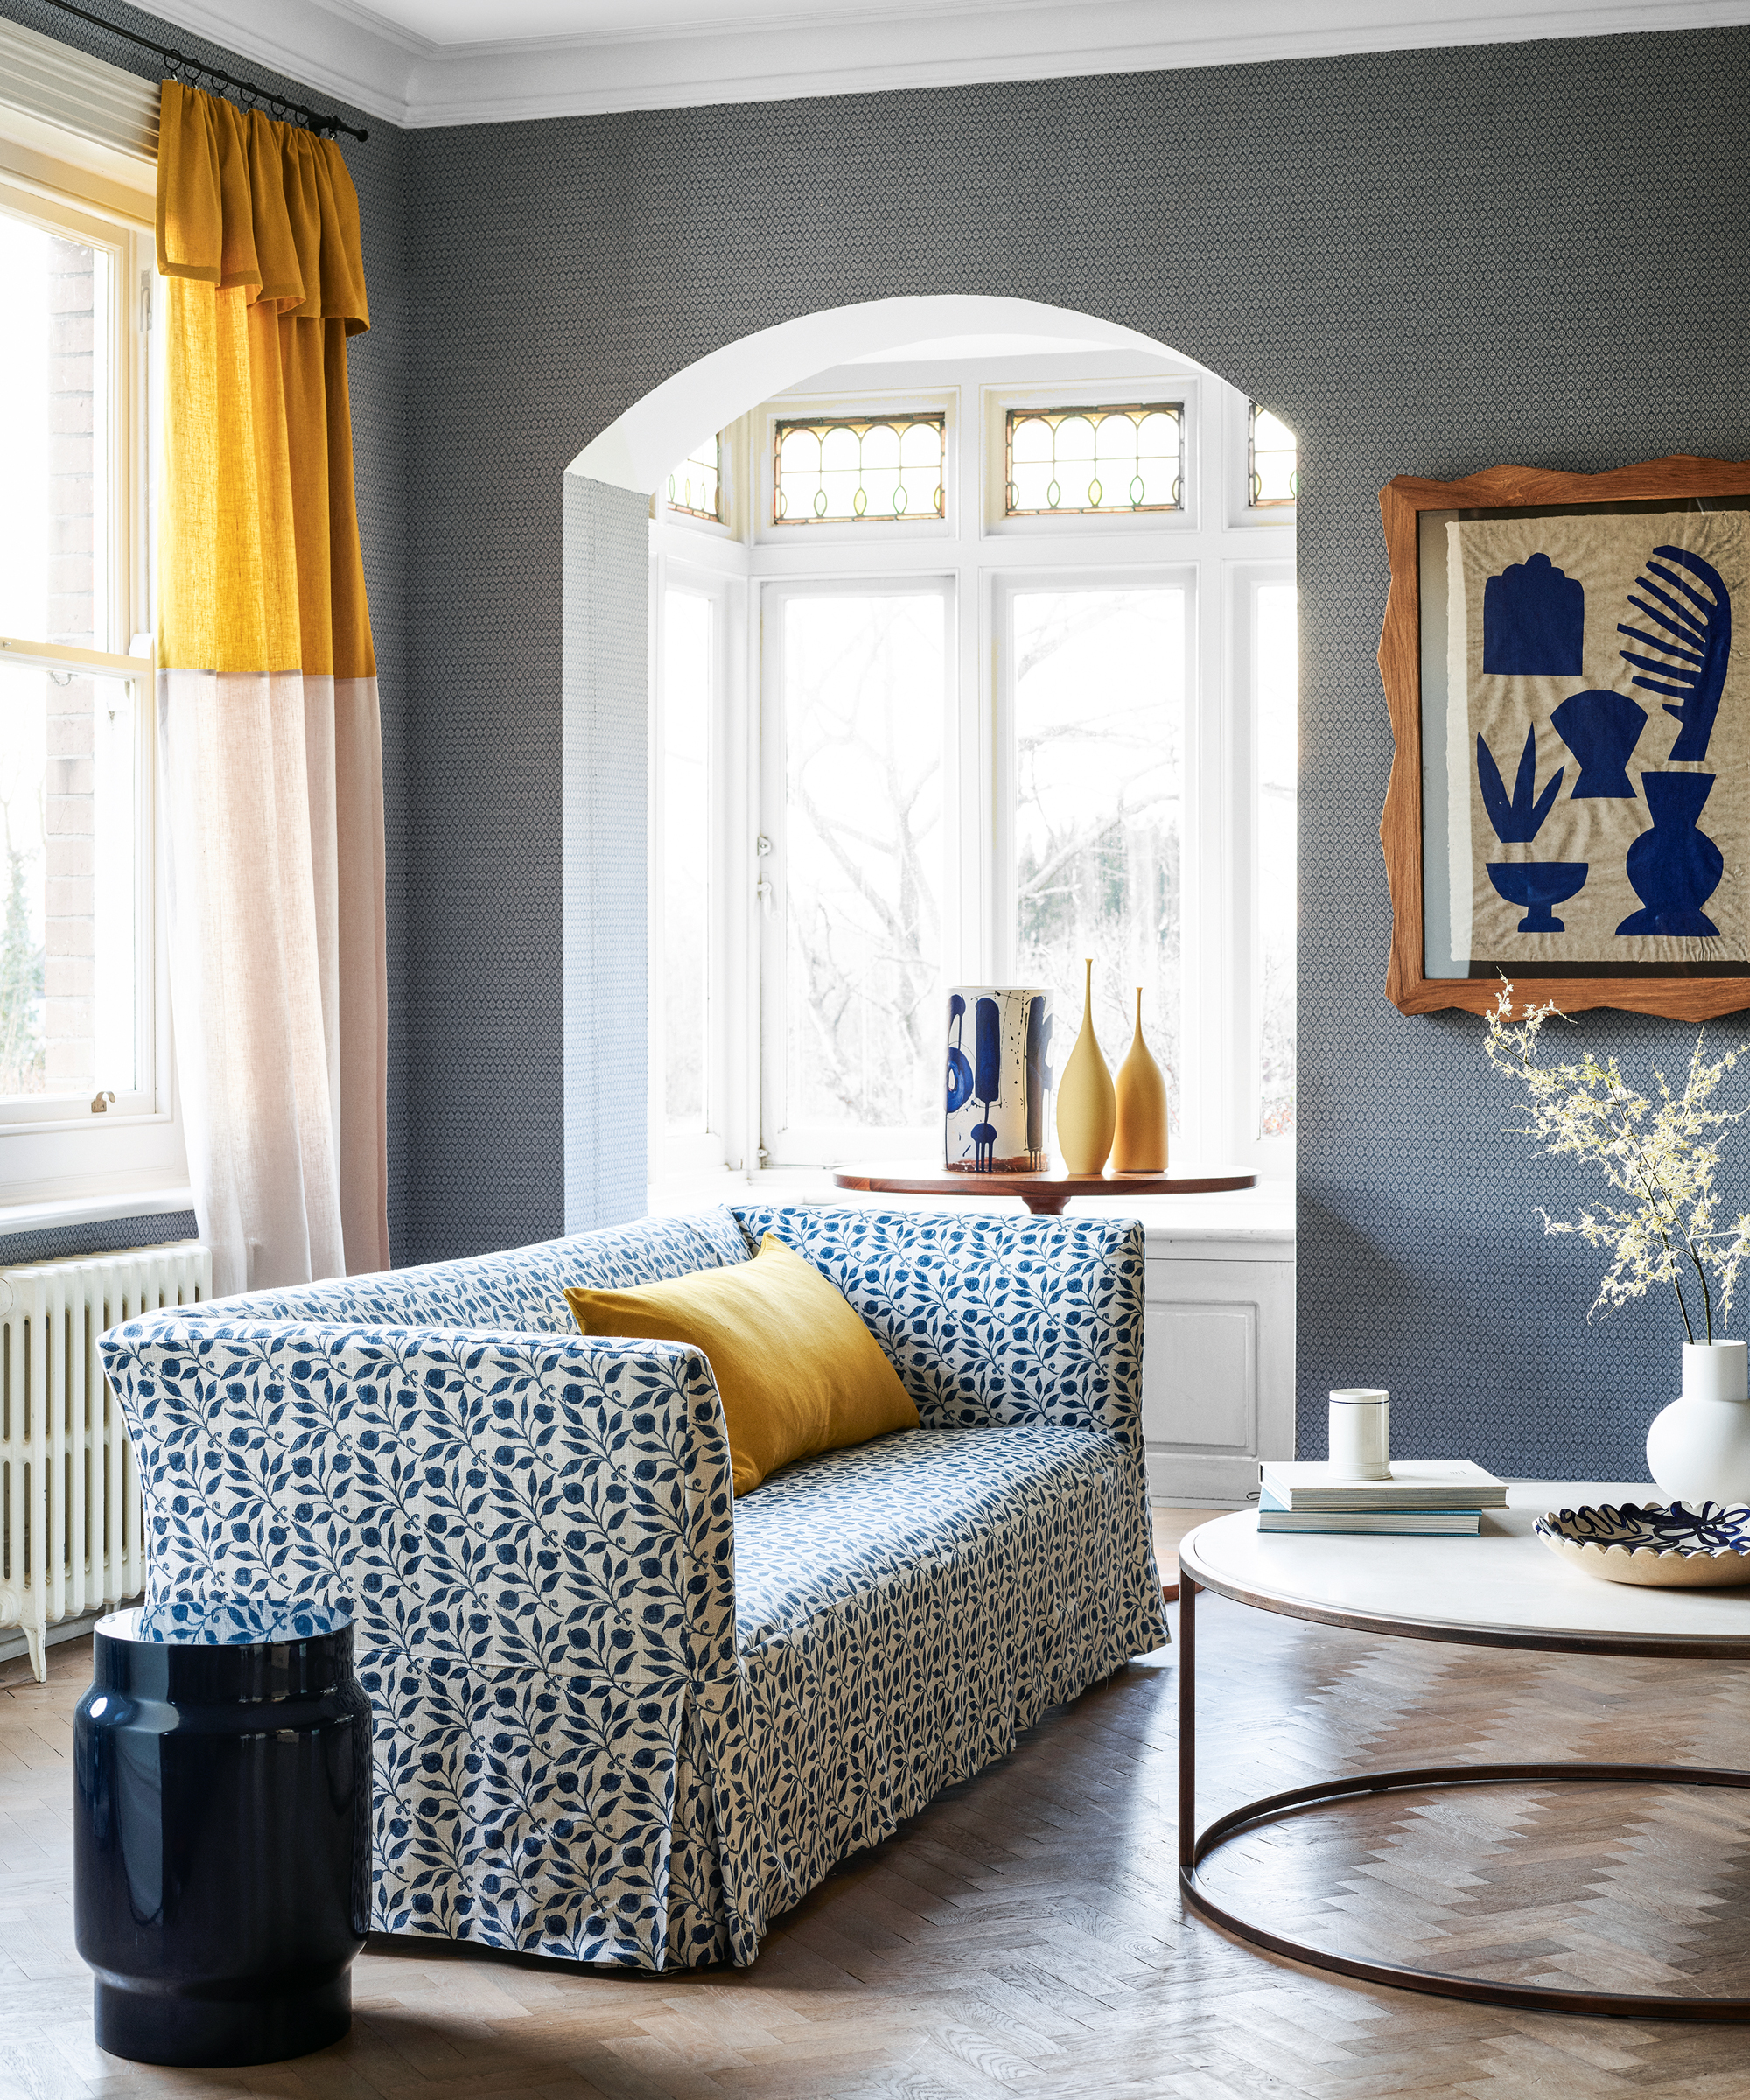 A living room with blue wallpaper and yellow accents